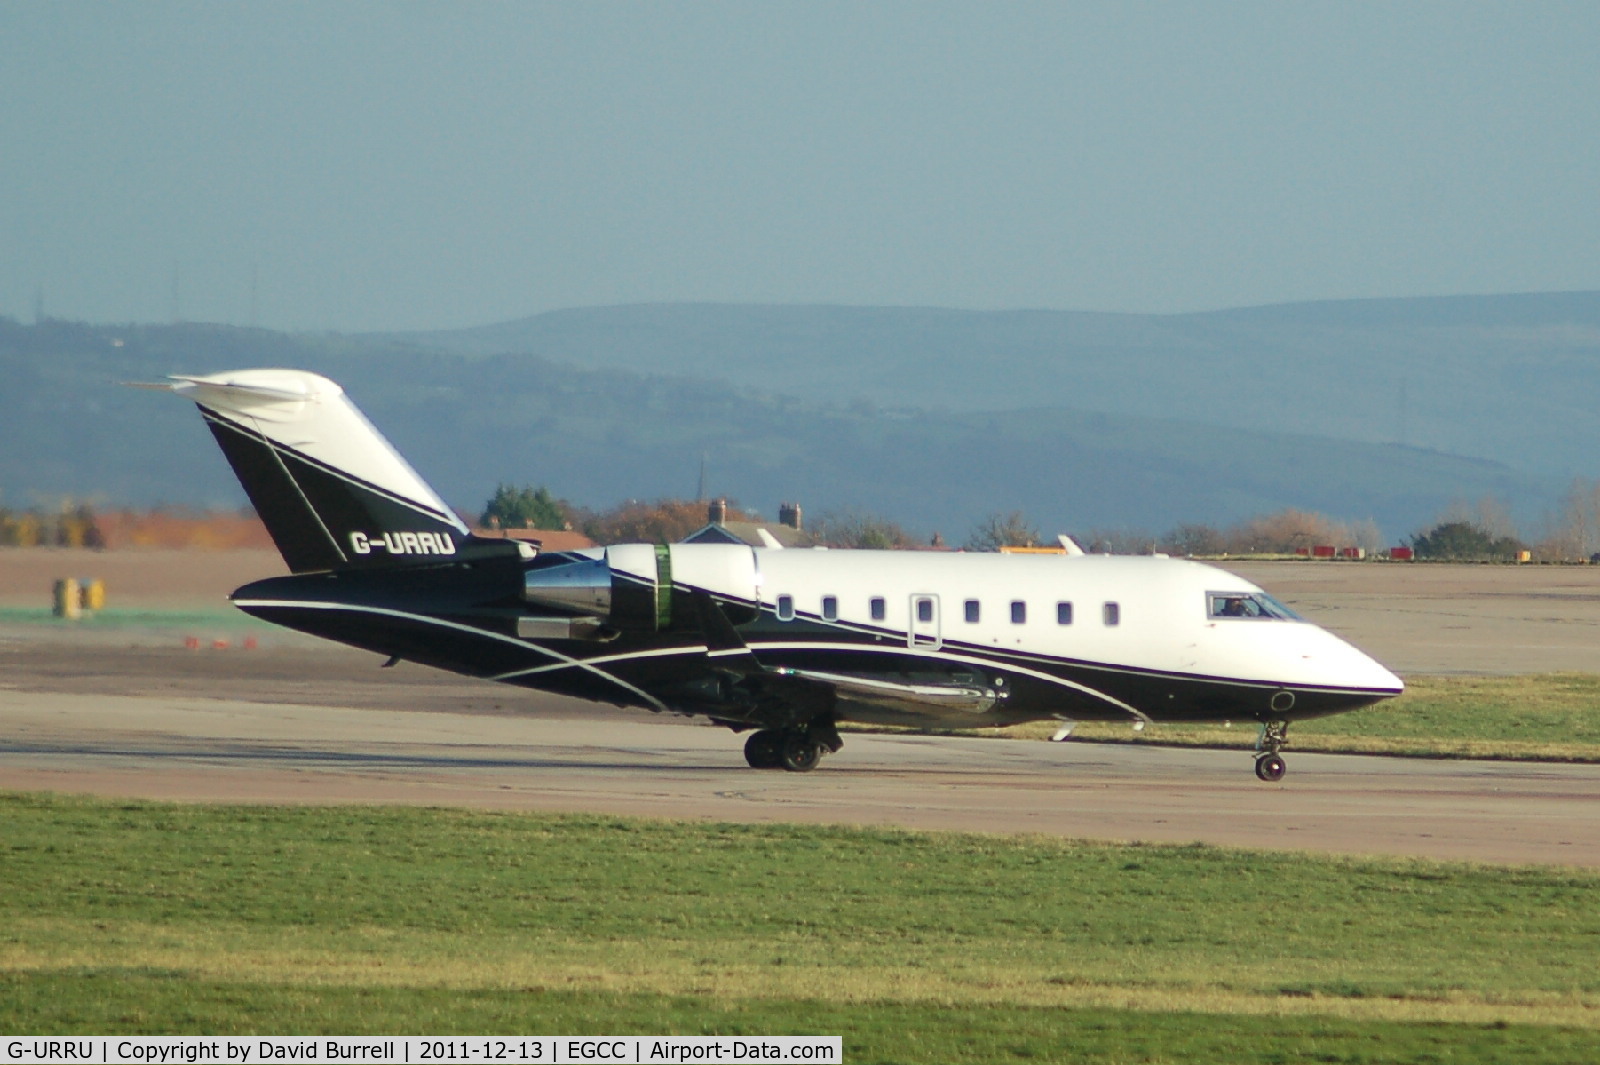 G-URRU, 2009 Bombardier Challenger 605 (CL-600-2B16) C/N 5821, Bombardier Cl-600-2b16 taxiing Manchester Airport.